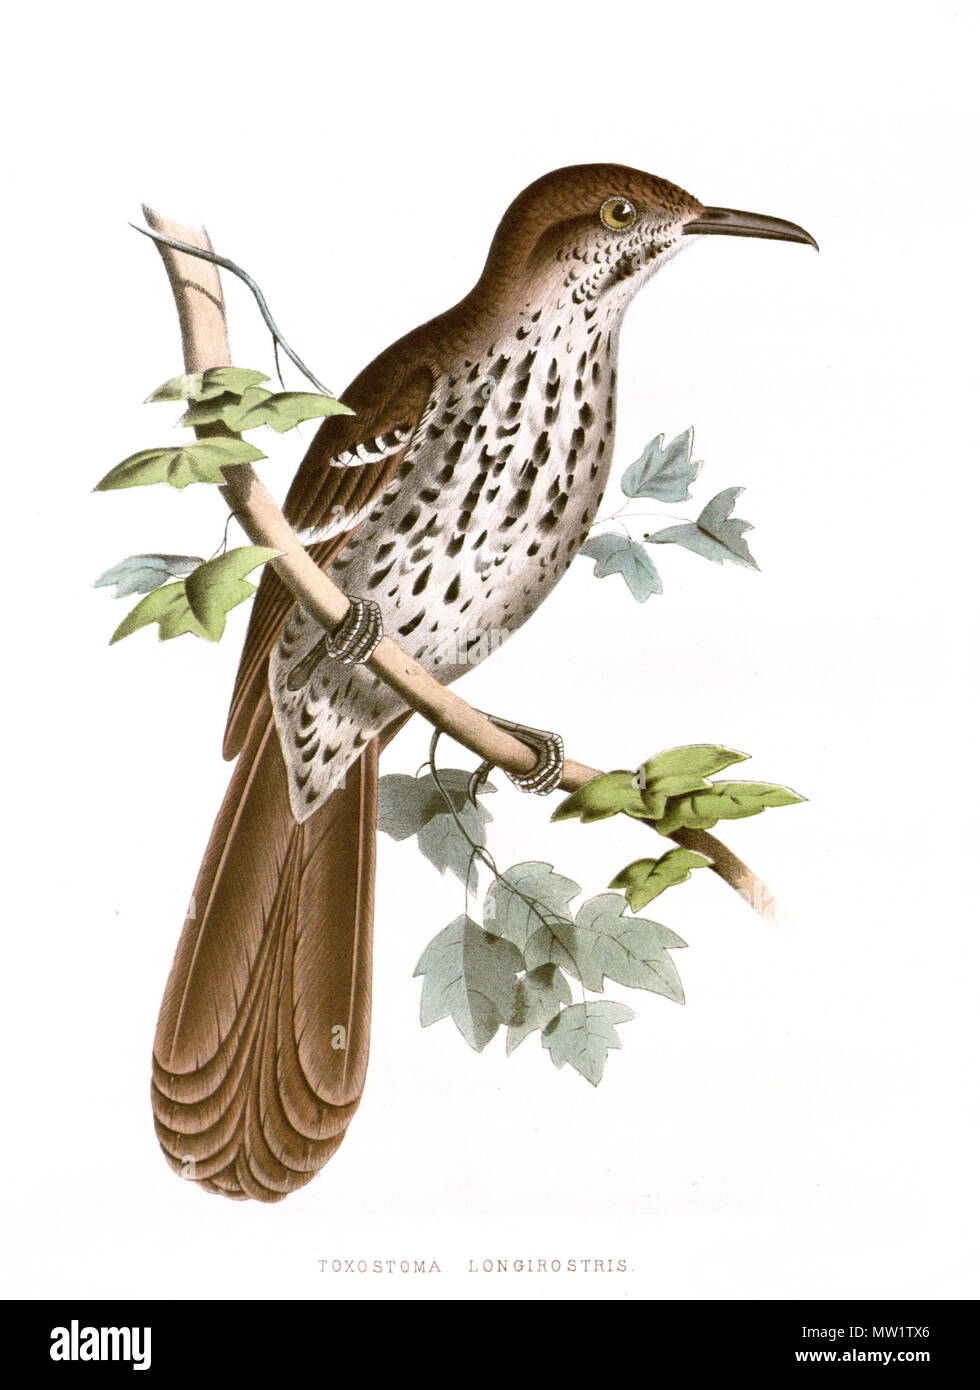 English: Adult Long-billed Thrasher, Toxostoma longirostre senetti,  illustration from Birds of the Boundary Deutsch: Langschnabel-Spottdrossel  (Toxostoma Longirostre) . 1860. Painting by Spencer F. Baird Scan or photo  by Earwig (talk page